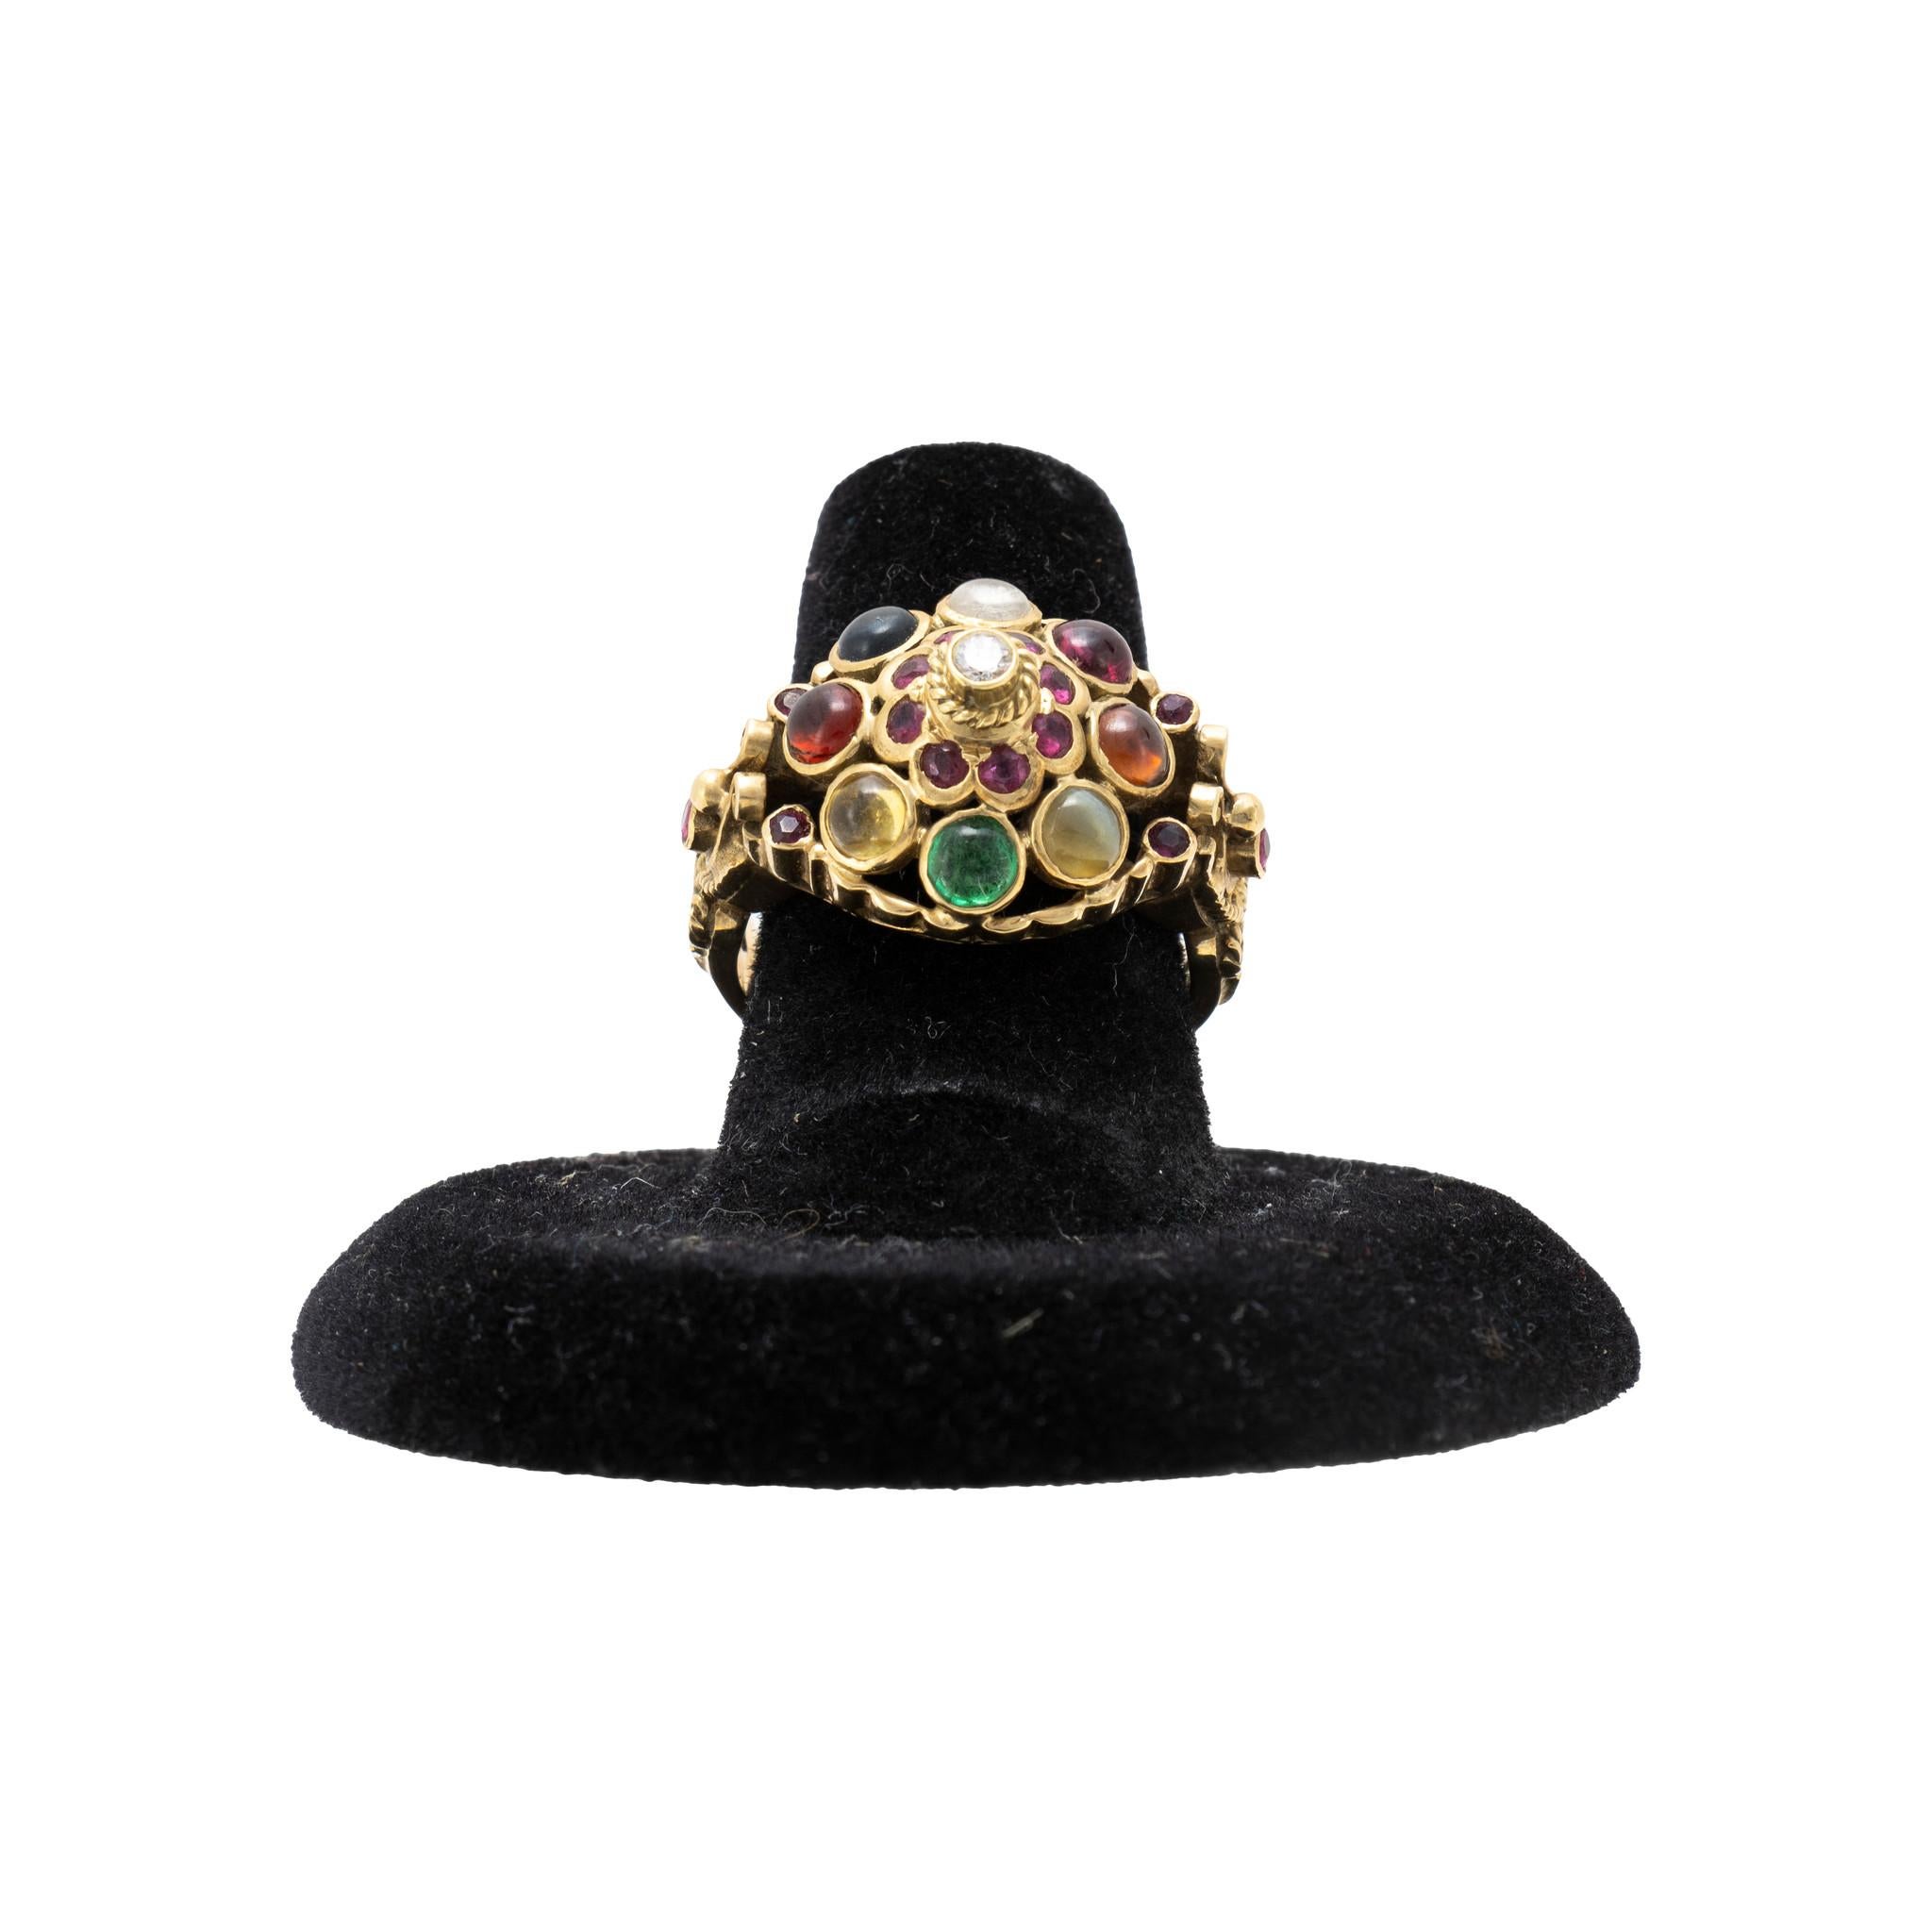 Finberg Mfg. Co. Victorian filigree in 14kt yellow gold with natural garnet, ruby, sapphire, emerald, moonstone, diamond, citrine and cat eye. Marked FM Co. 8-2 and stamped 14K. The Finberg Manufacturing Company (1925-45) was headquartered in